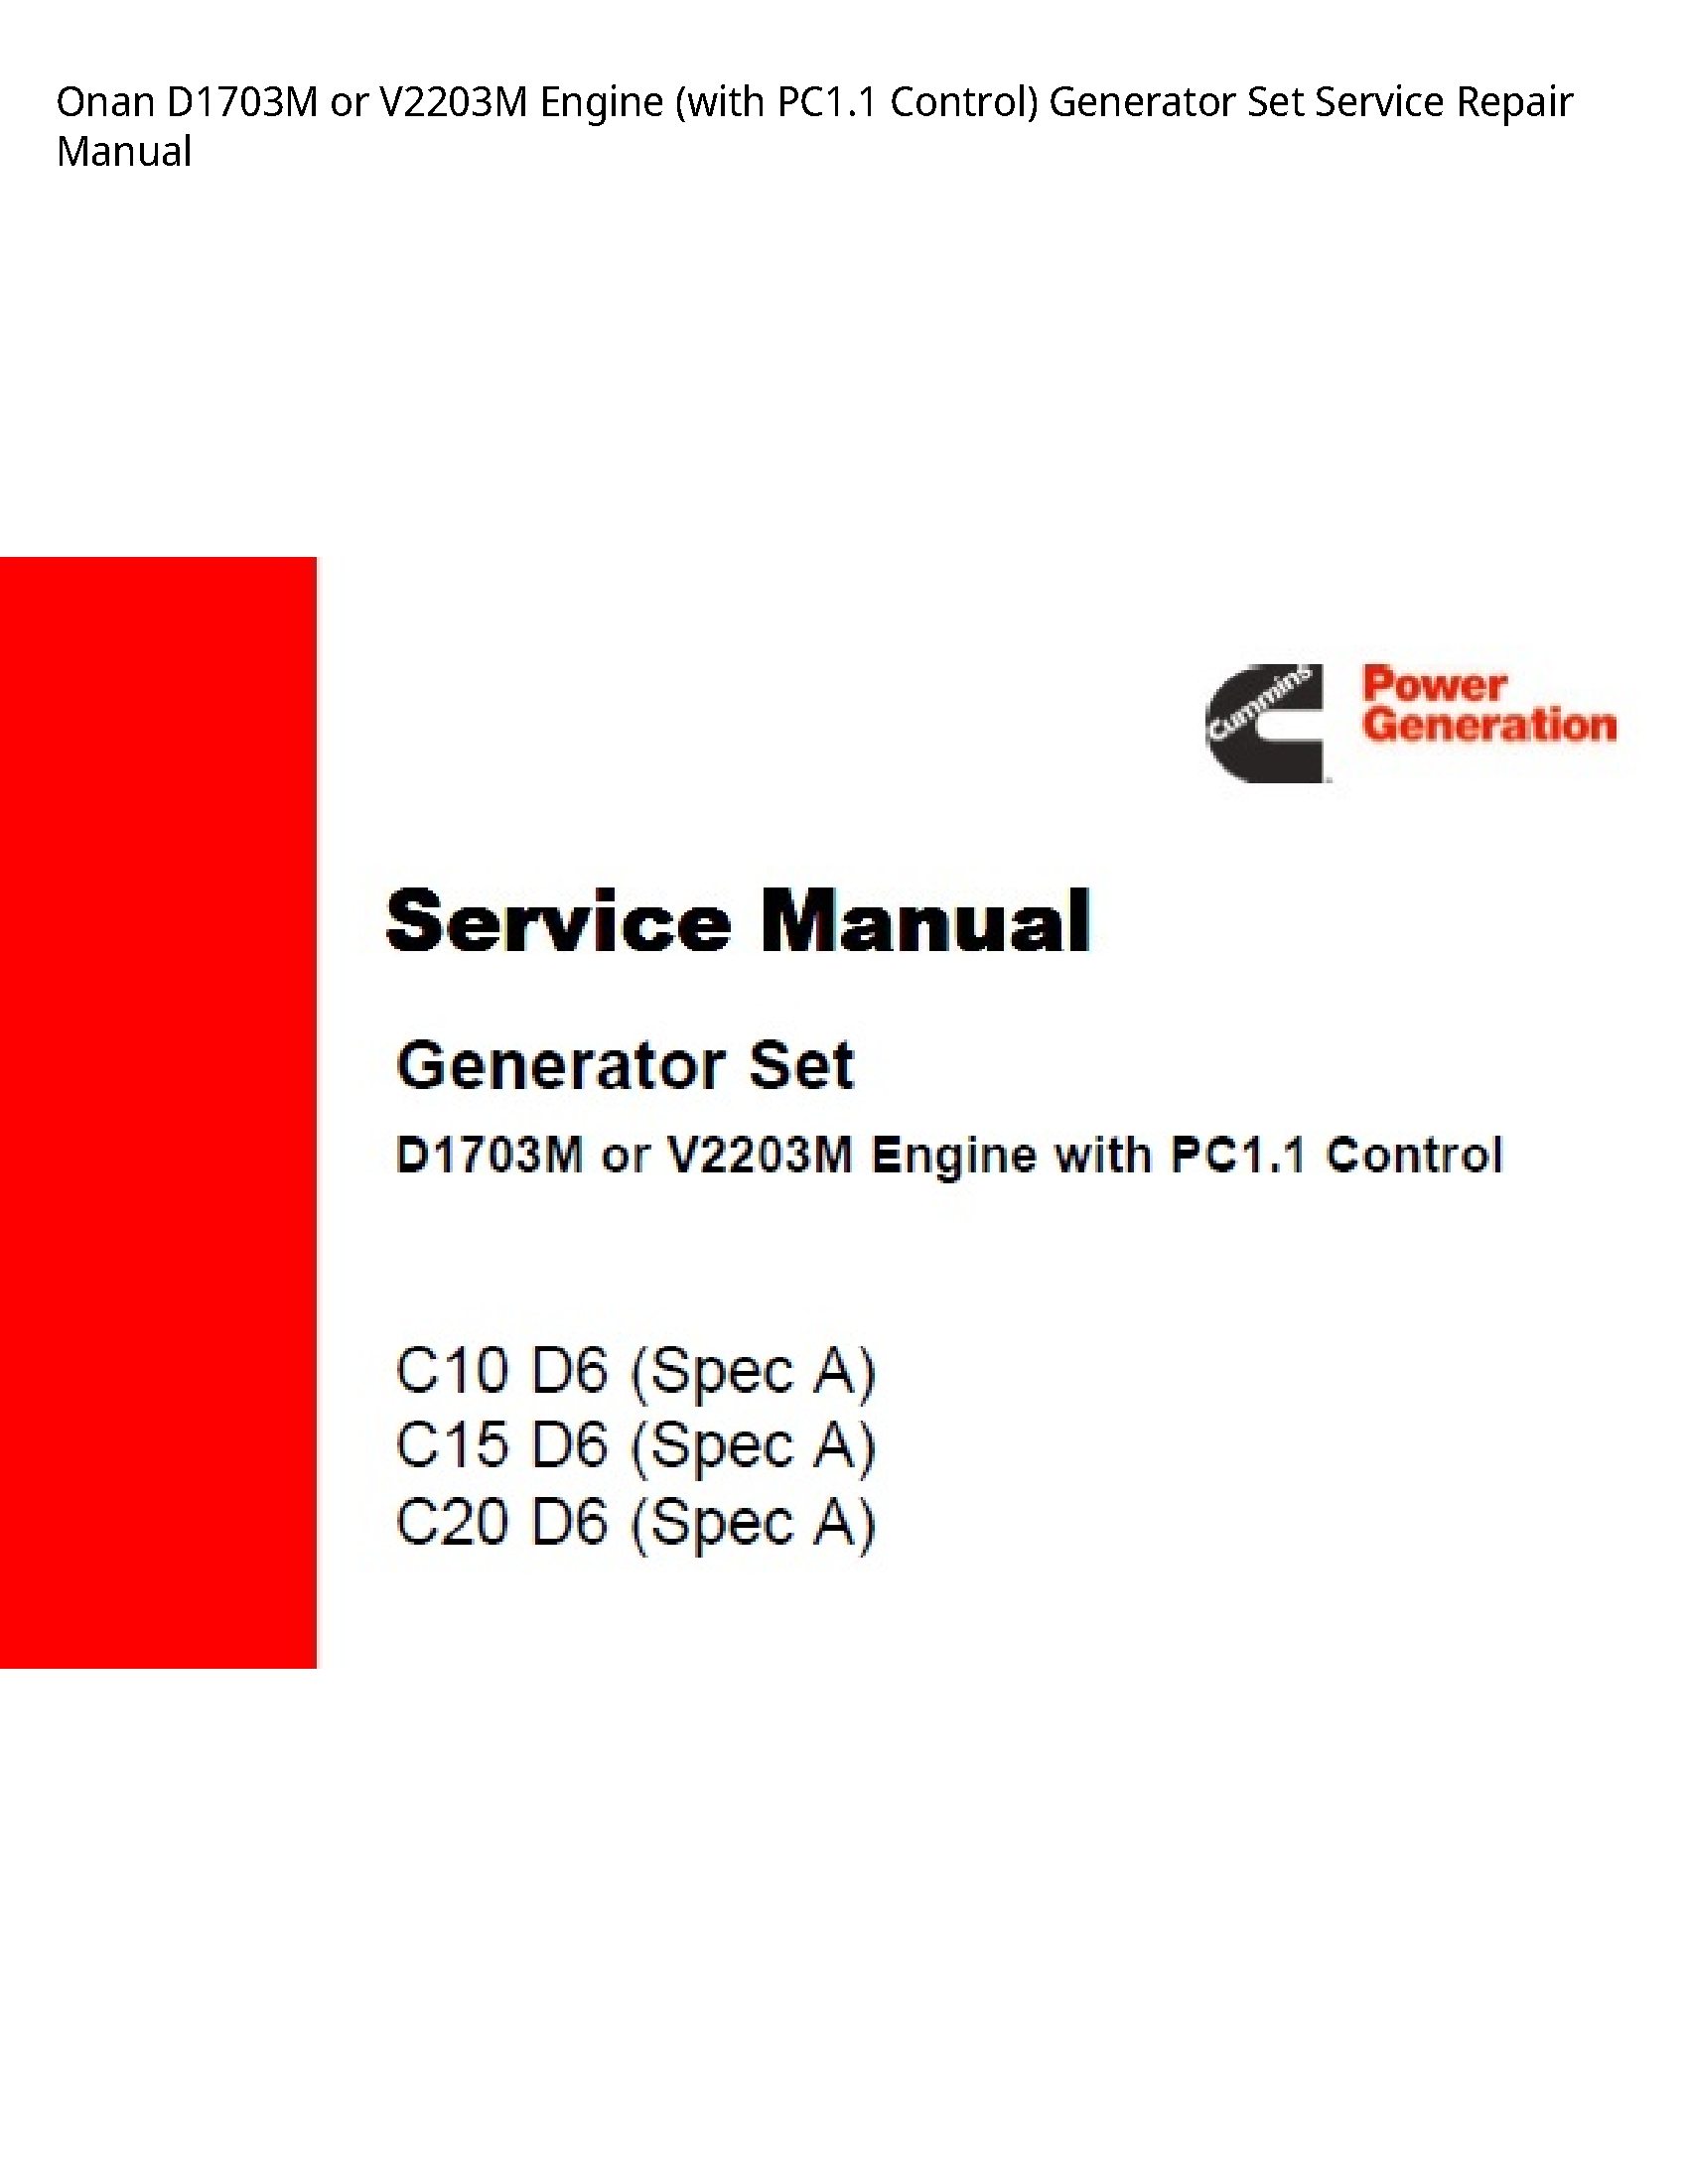 Onan D1703M or Engine (with Control) Generator Set manual